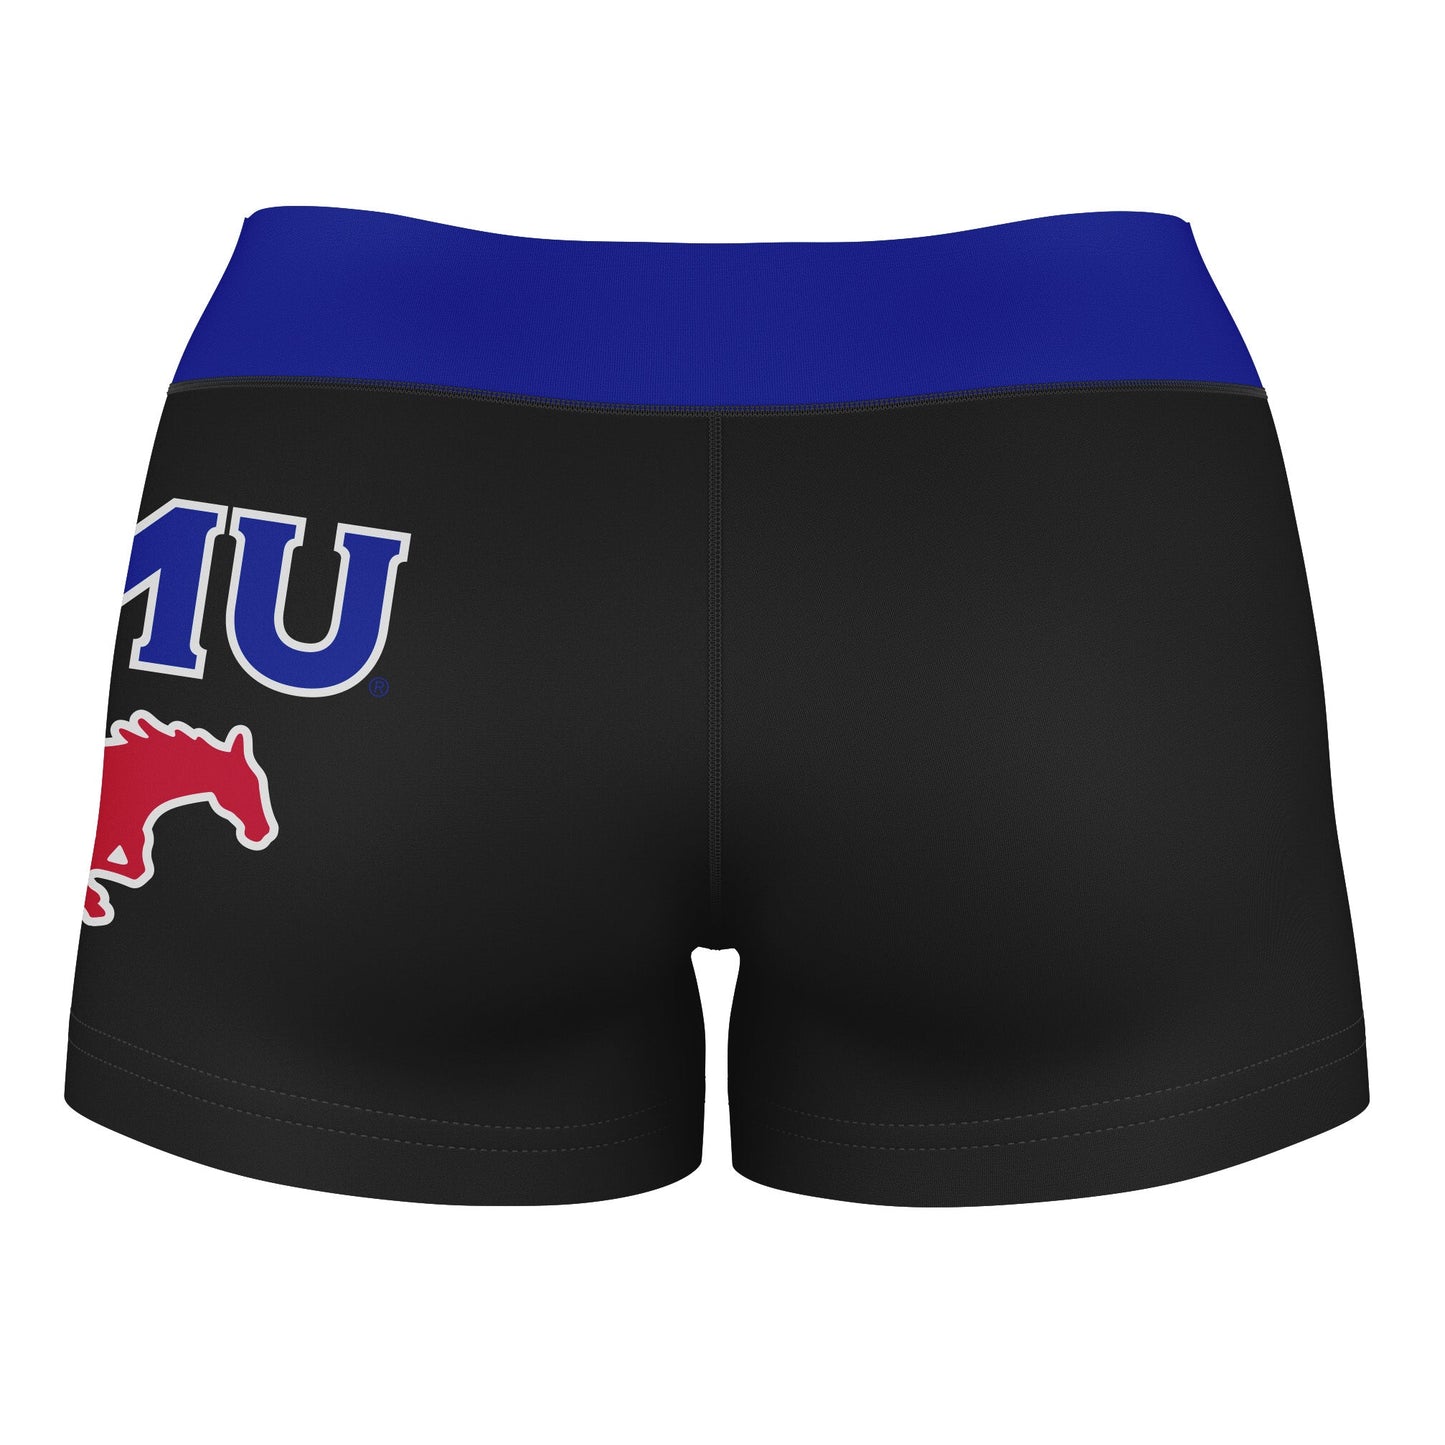 SMU Mustangs Vive La Fete Game Day Logo on Thigh and Waistband Black & Blue Women Yoga Booty Workout Shorts 3.75 Inseam" - Vive La F̻te - Online Apparel Store